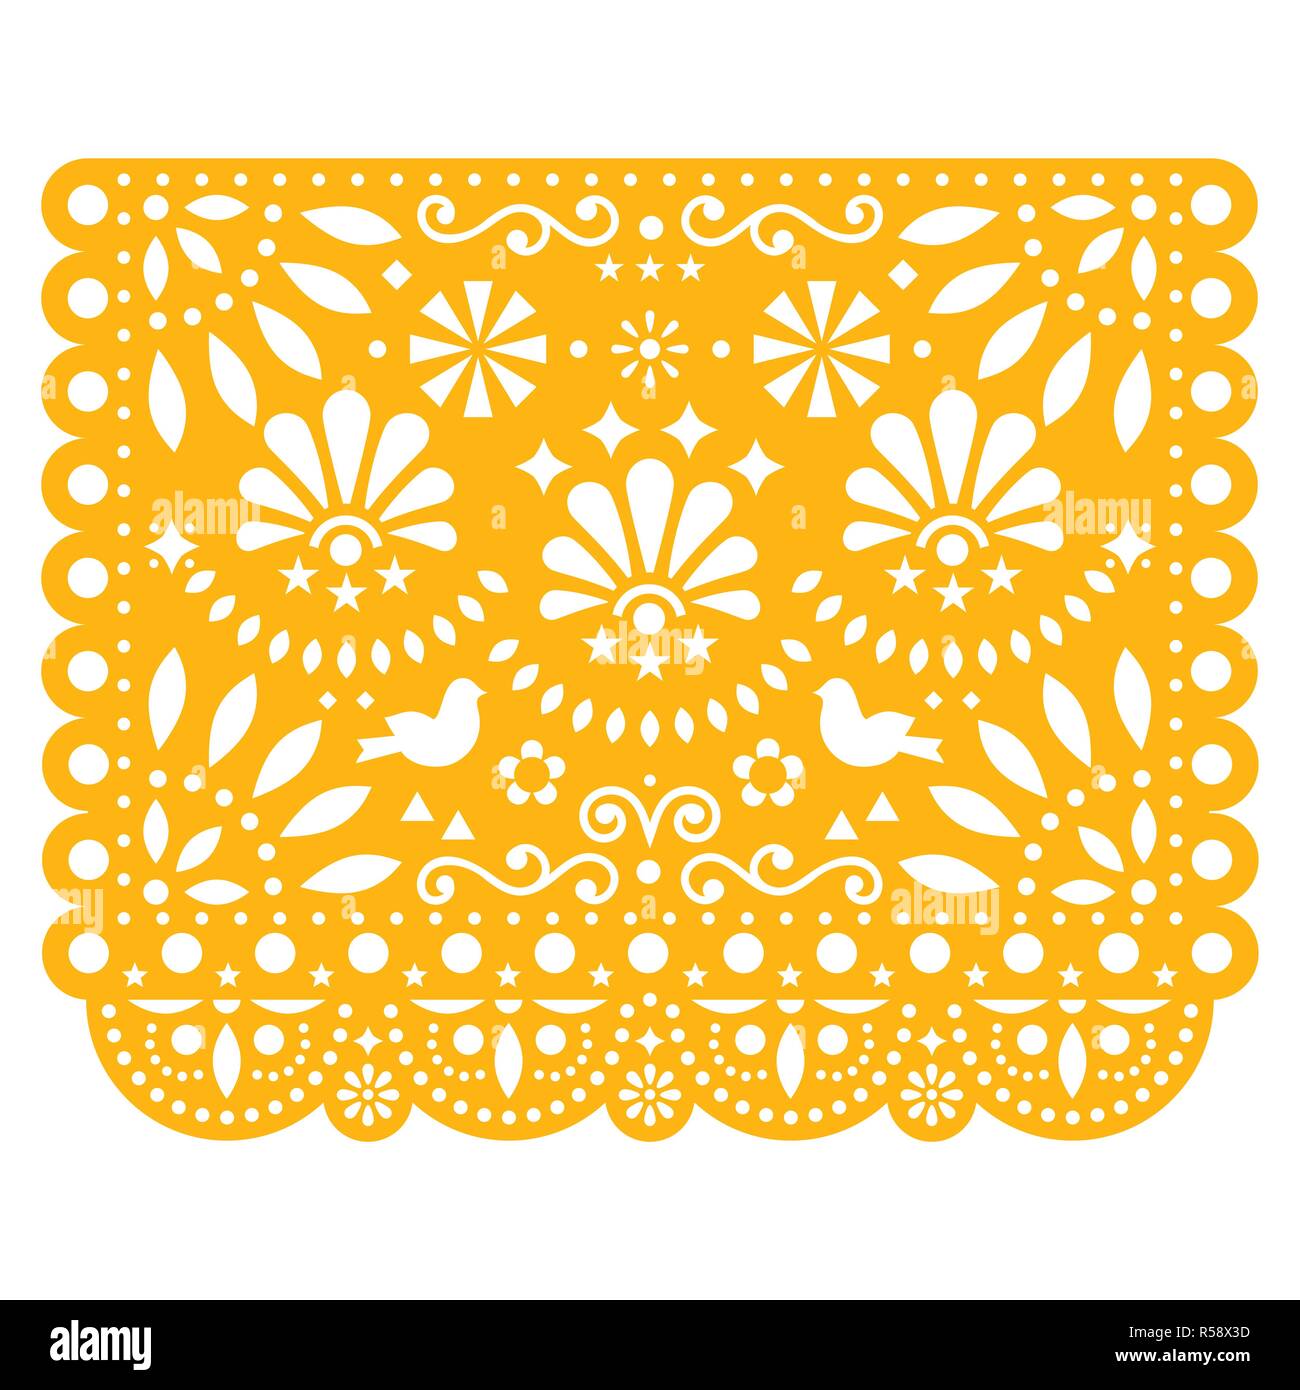 Papel Picado vector floral design with birds, Mexican paper decorations template in yellow, traditional fiesta banner Stock Vector